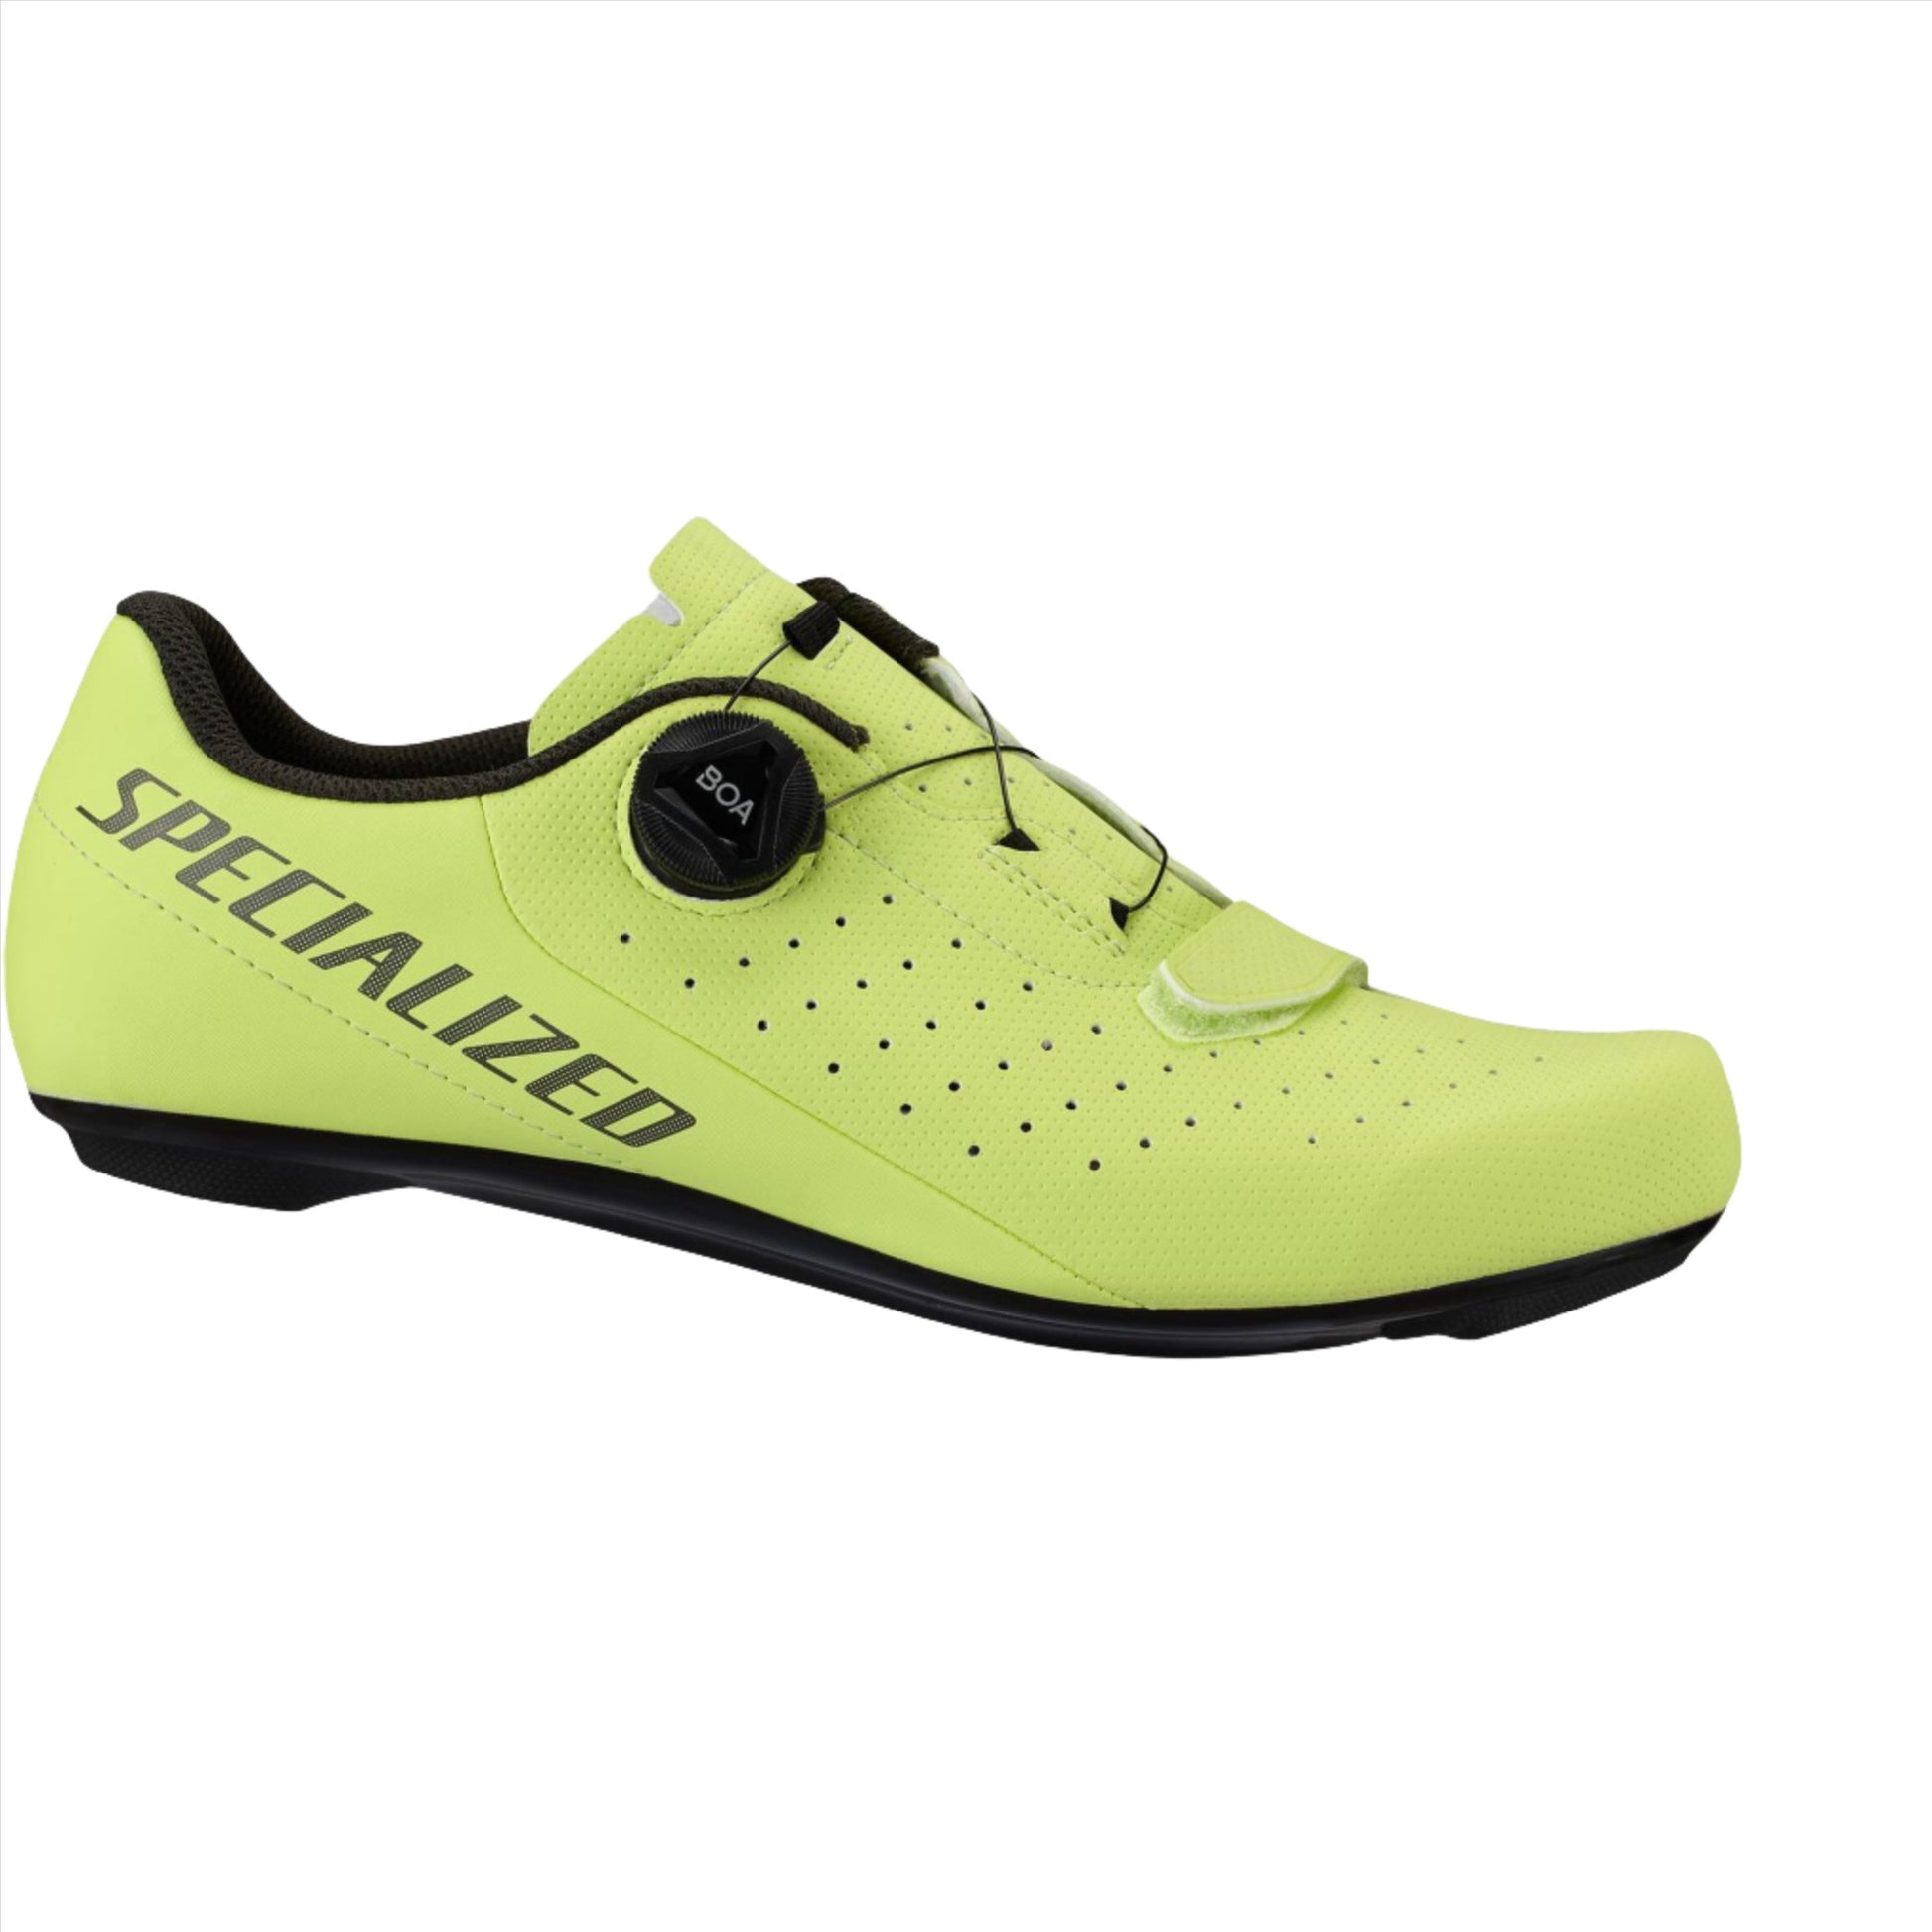 Torch 1.0 Road Shoes | Complete Cyclist - Take the performance and Body Geometry ergonomics of our high-end road shoes, put them in an affordable design, and you basically have the Torch 1.0 Road shoes.